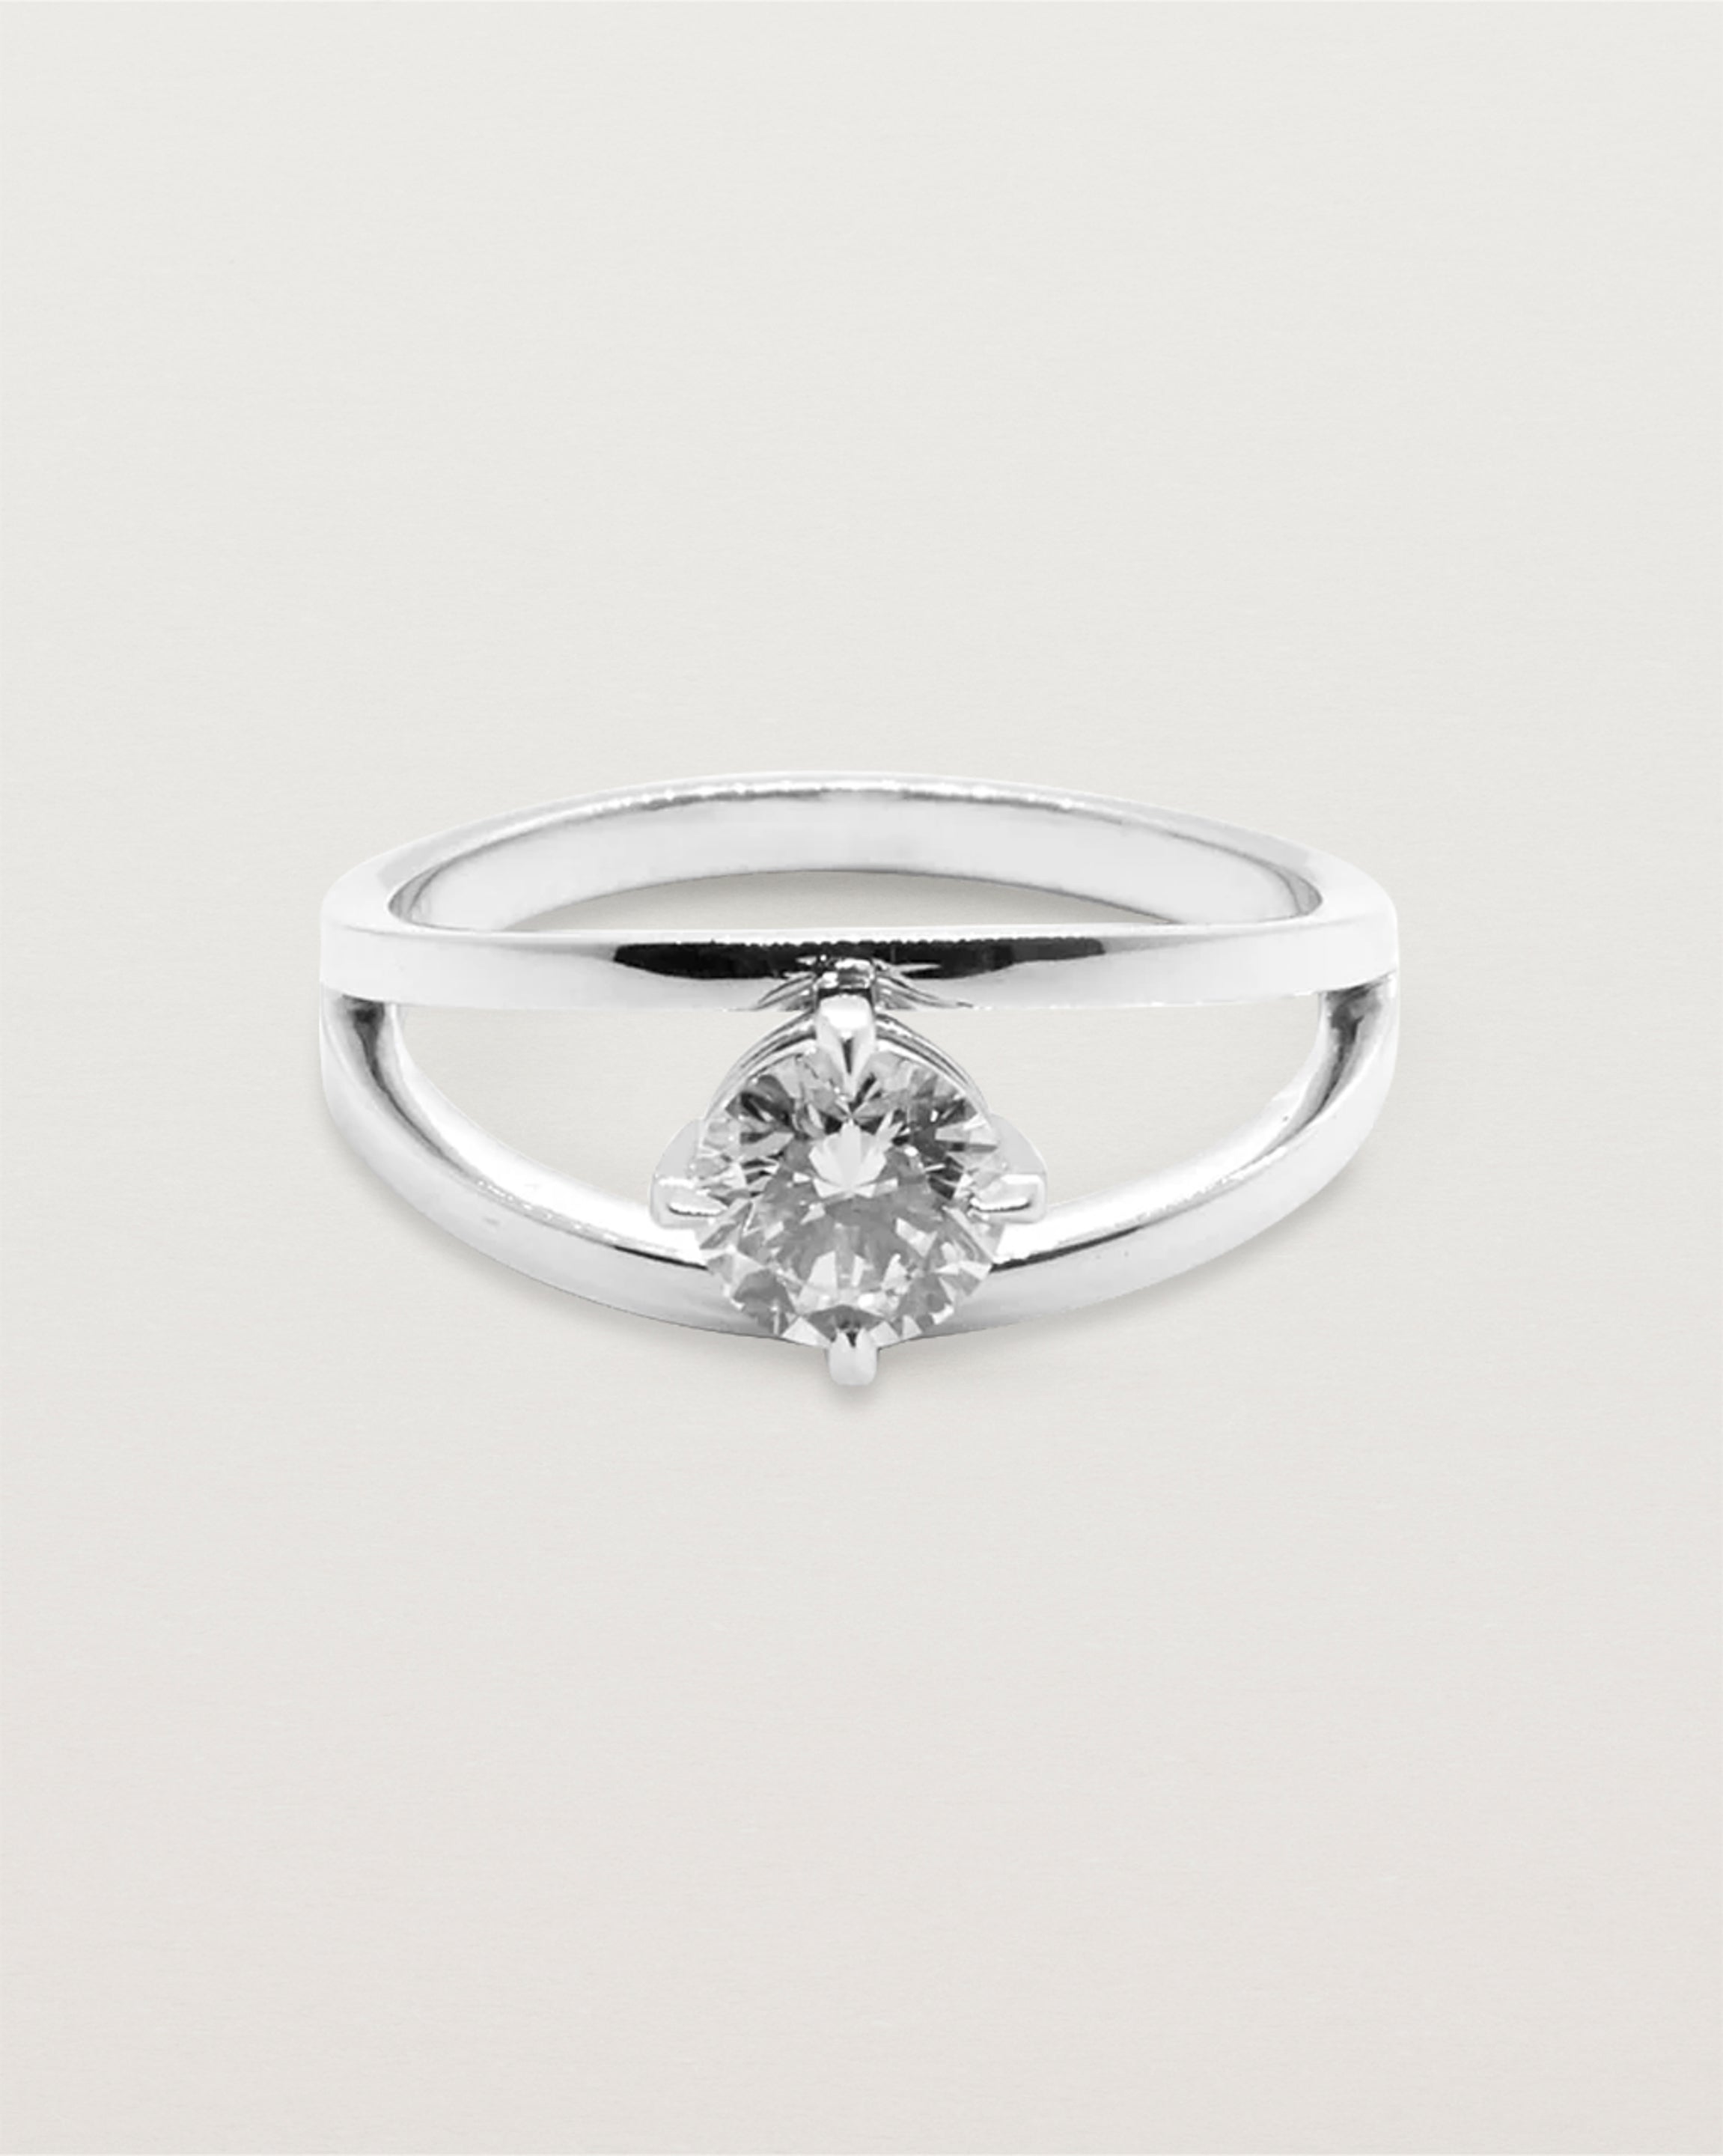 A square profile double-band sweeps up to hold a round brilliant cut white diamond, crafted in white gold